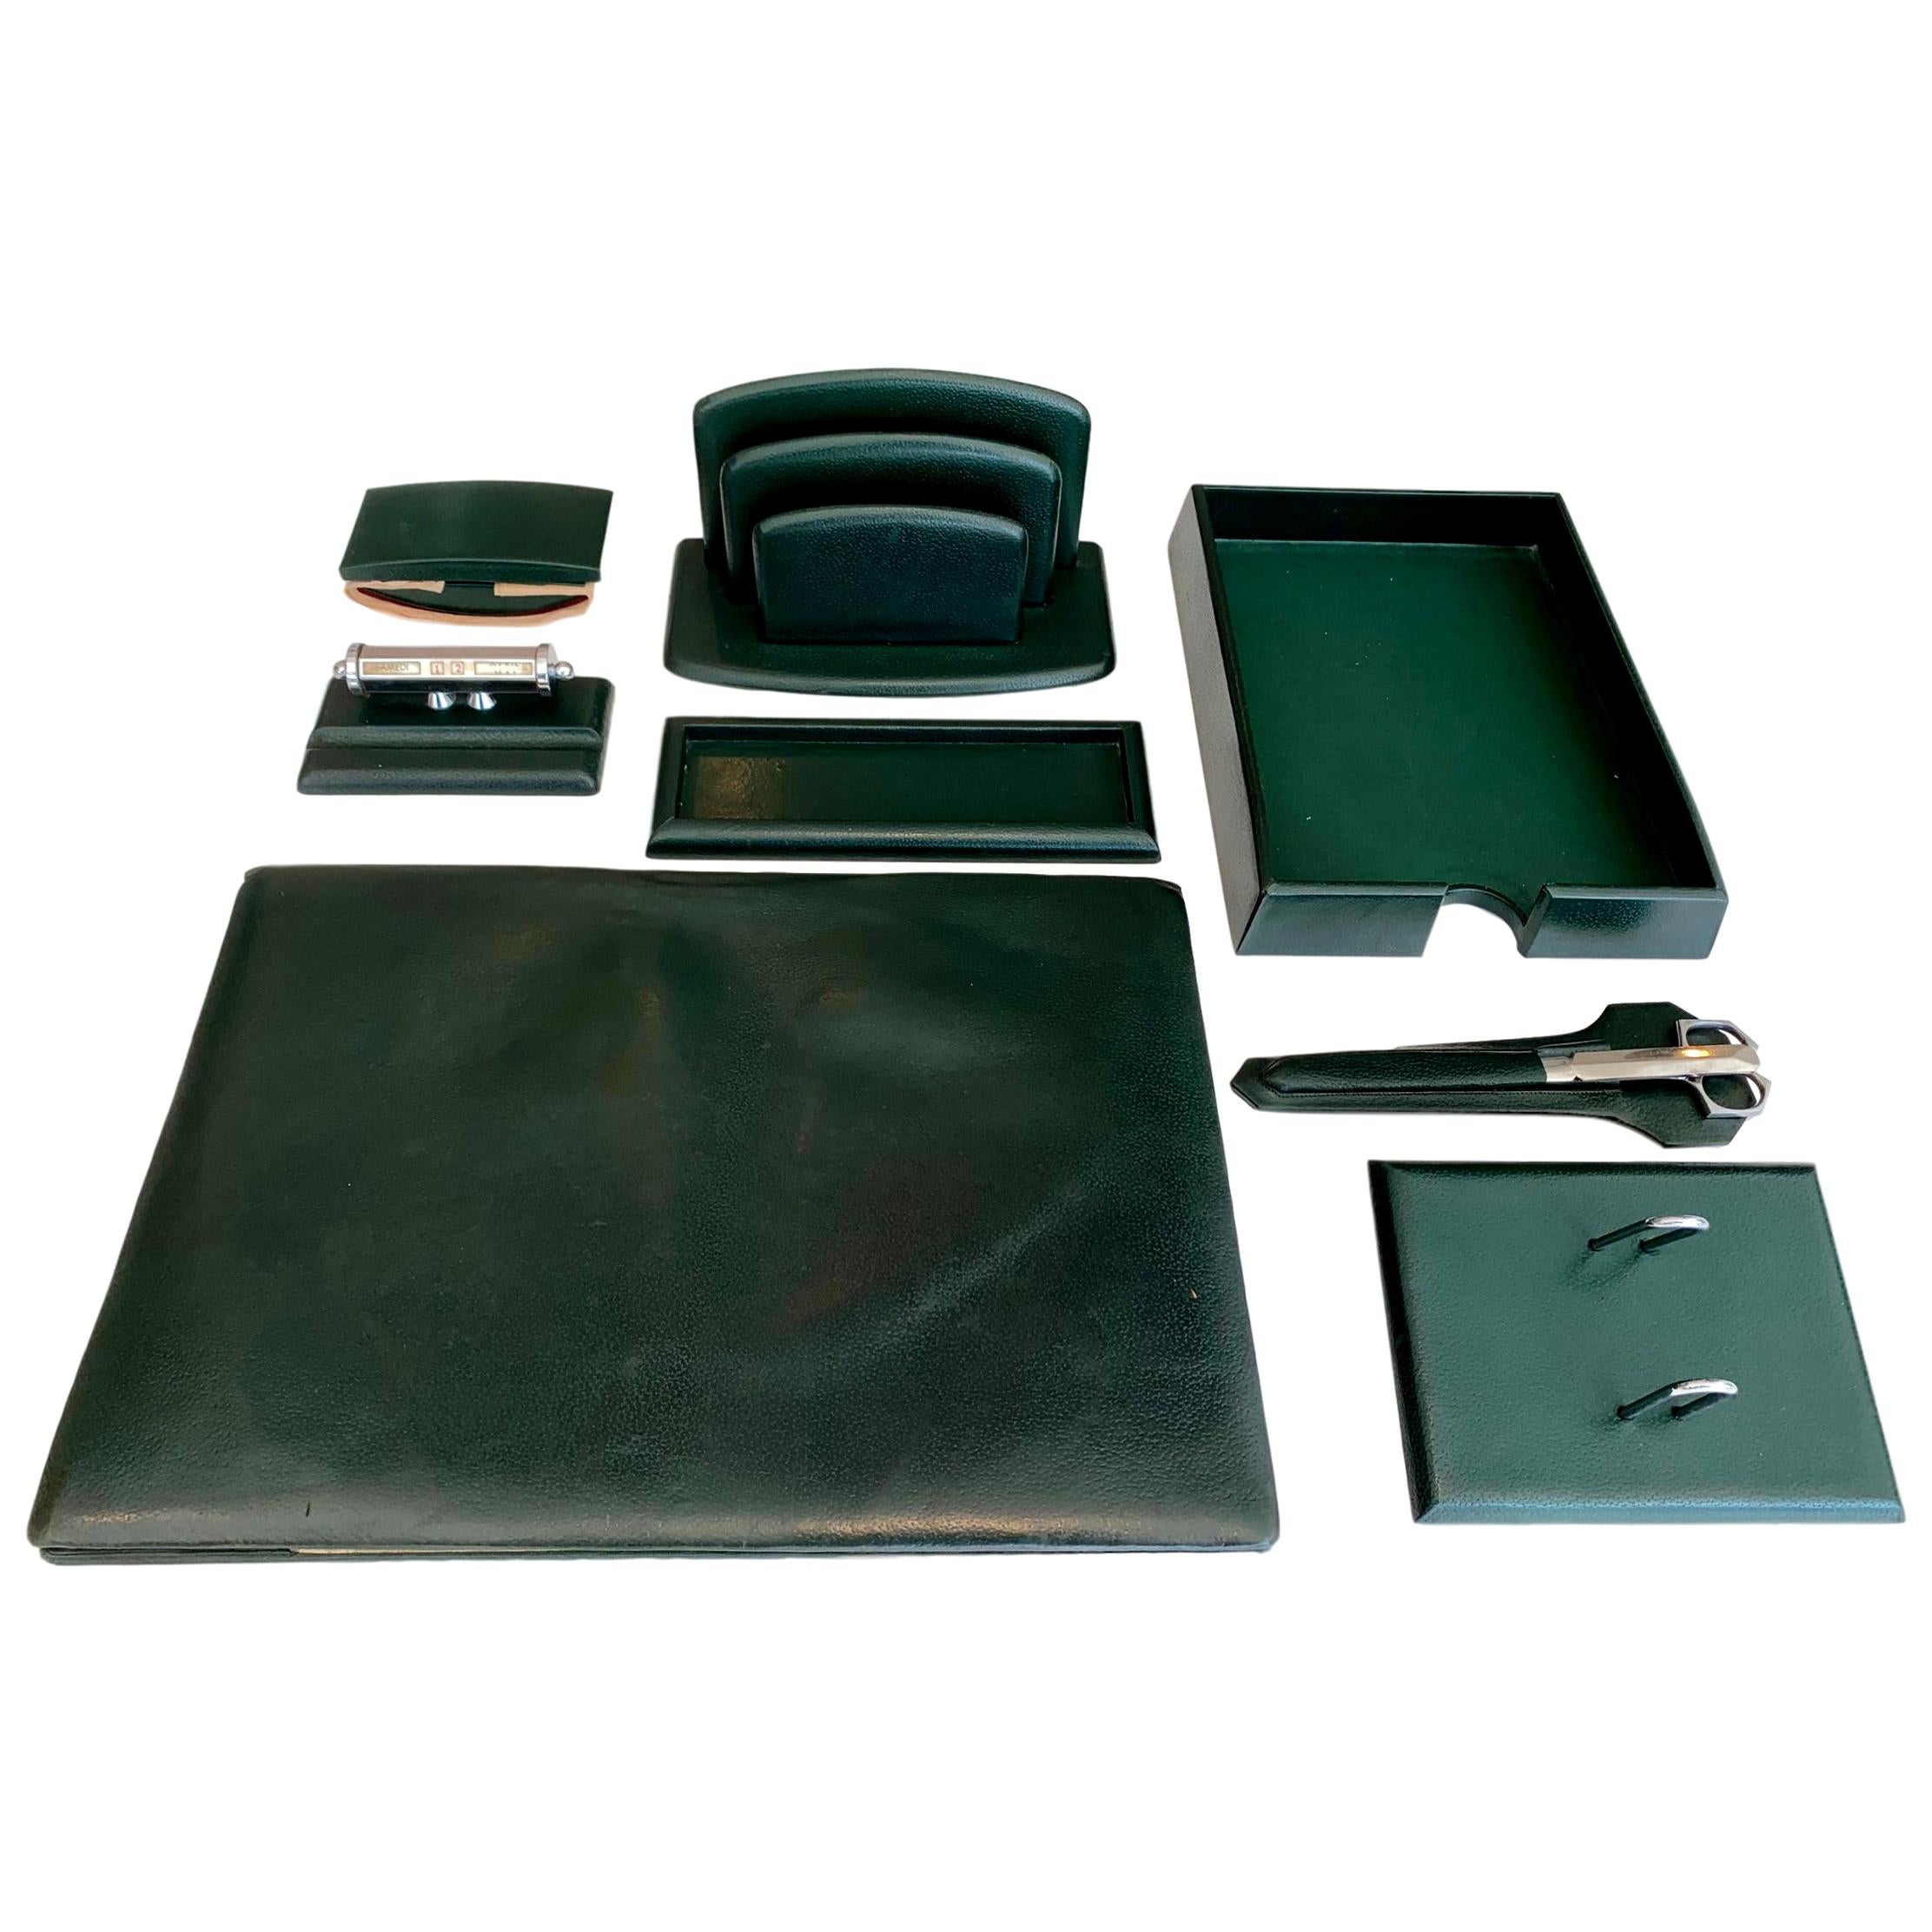 French Leather Desk Set By Le Tanneur, Green Leather Desk Pad